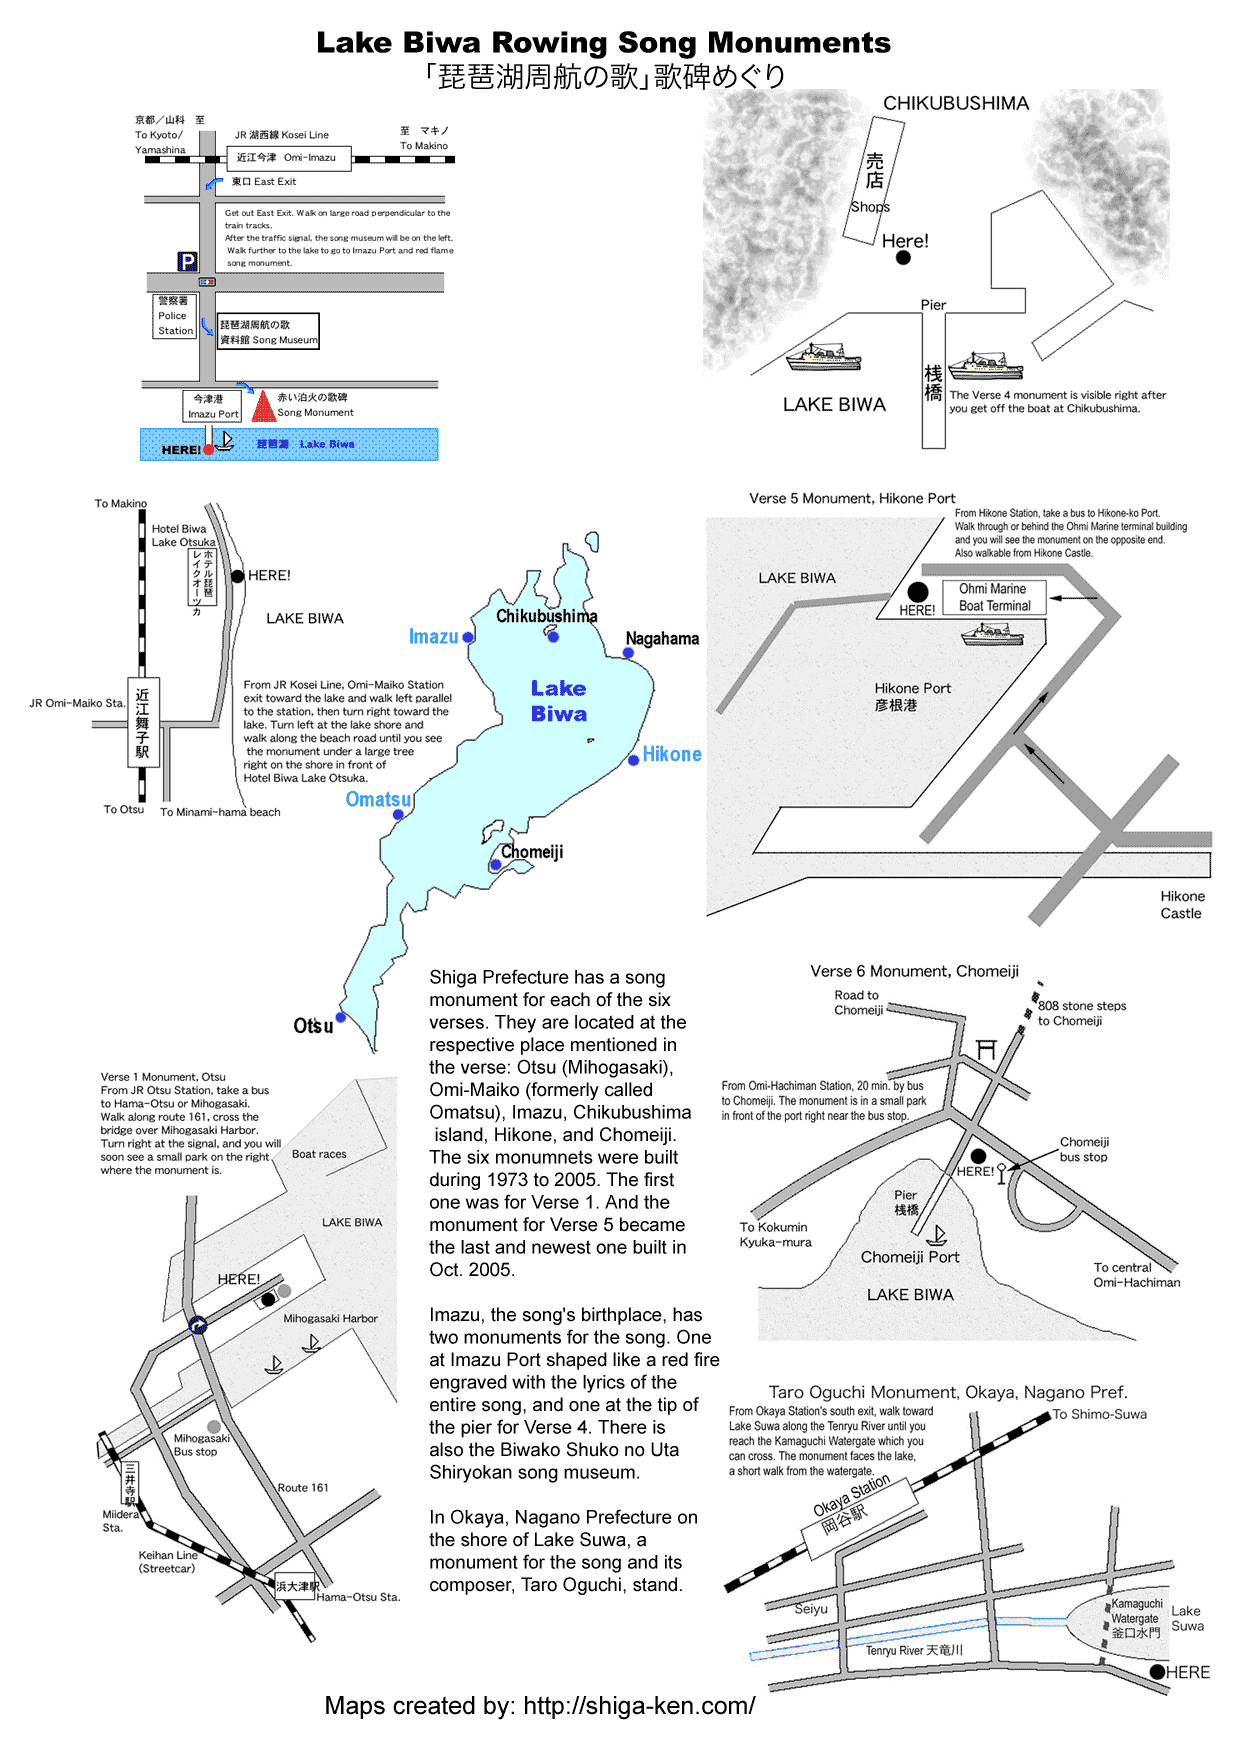 Printable map and directions to all song monuments. [url=https://drive.google.com/open?id=1Tfz1R51er-qZEx5FybiXyvNfFOY&usp=sharing]Google map[/url] 歌碑の案内地図
Also see this Google map: [url=https://drive.google.com/open?id=1Tfz1R51er-qZEx5FybiXyvNfFOY&usp=sharing]Google map[/url]
Keywords: shiga lake biwa rowing song biwako shuko no uta boating monument